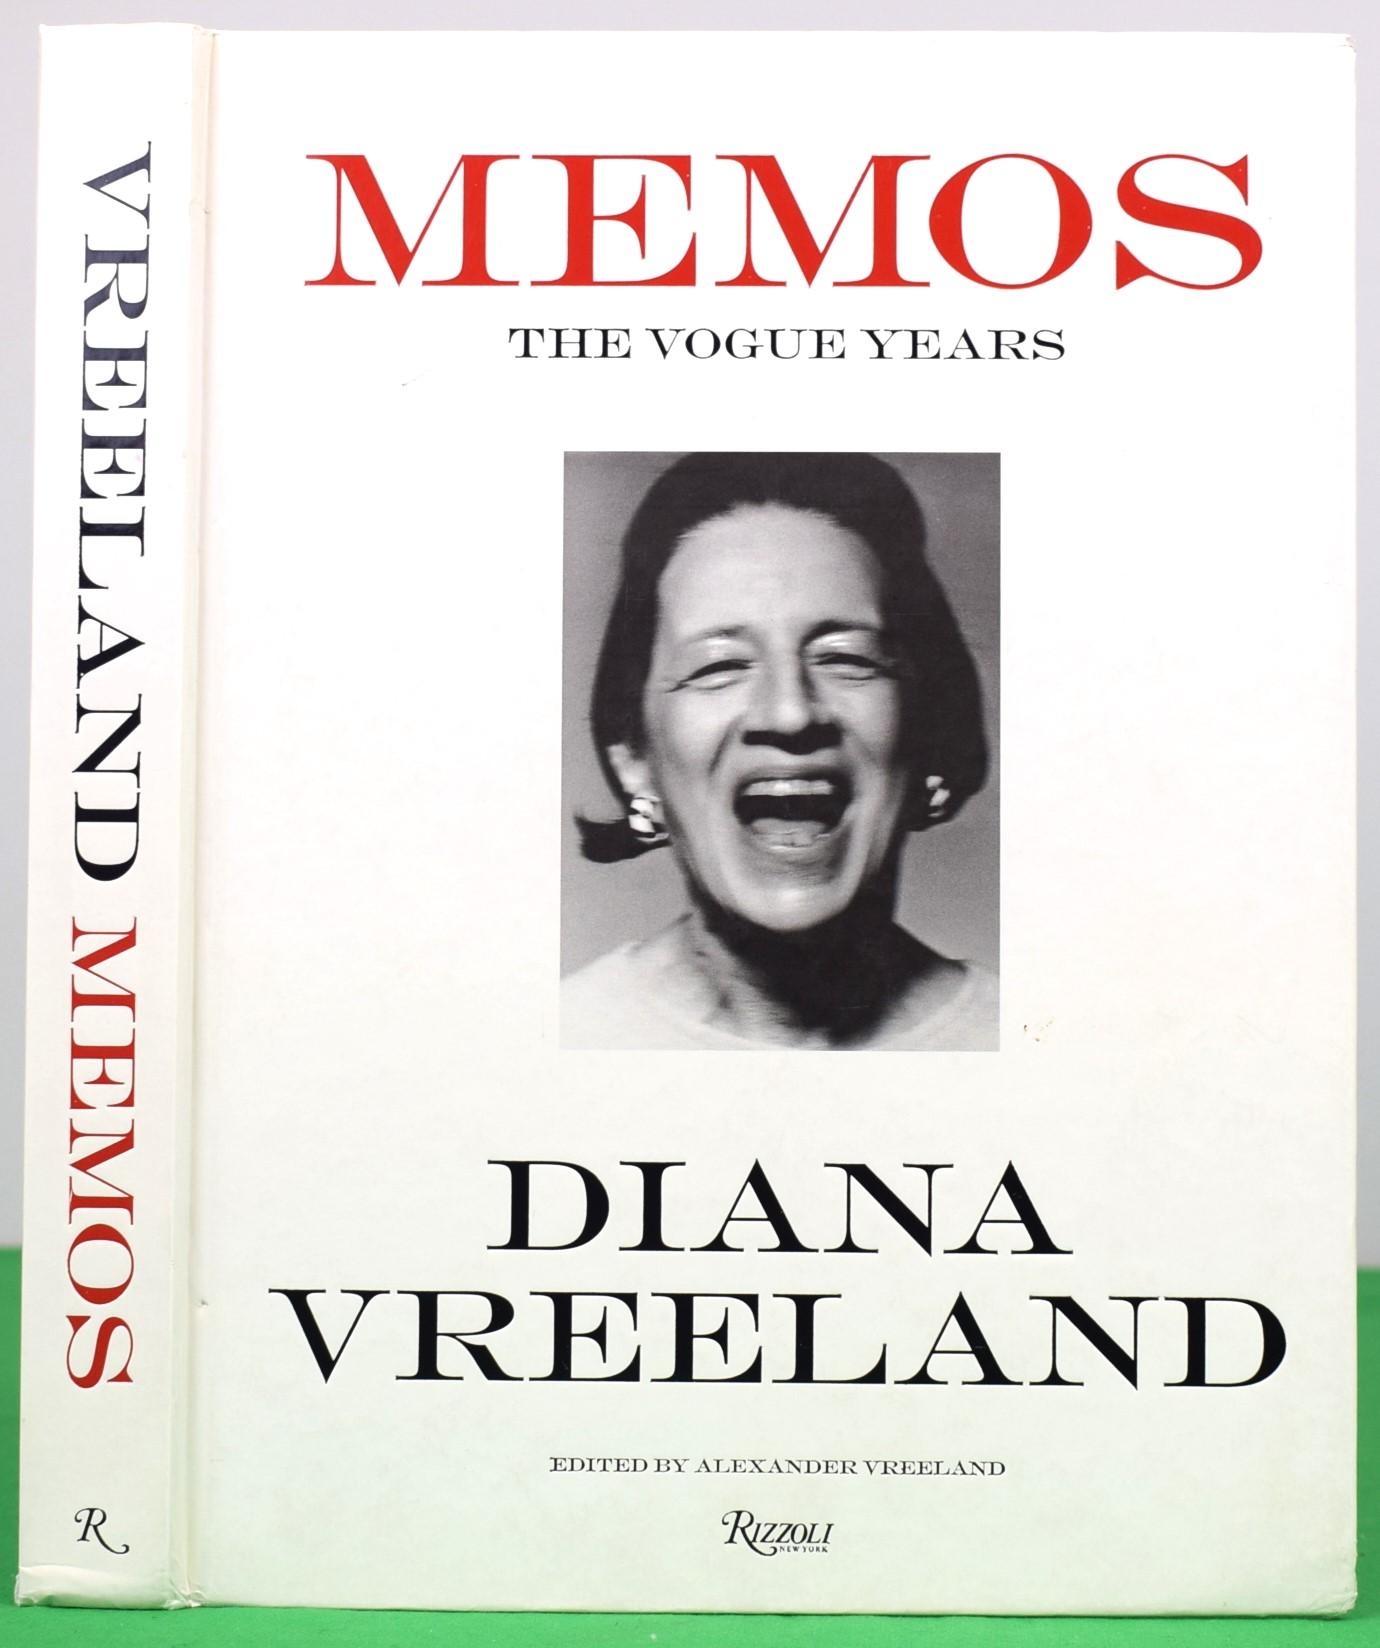 VREELAND, Alexander [edited by]

[304] pp.

Rizzoli

2013

12 1/4" x 9 1/4"

Diana Vreeland Memos: The Vogue Years, a new book from Rizzoli, chronicles the editor's tenure at this magazine from 1962 to 1971. Though she rarely held meetings, Vreeland